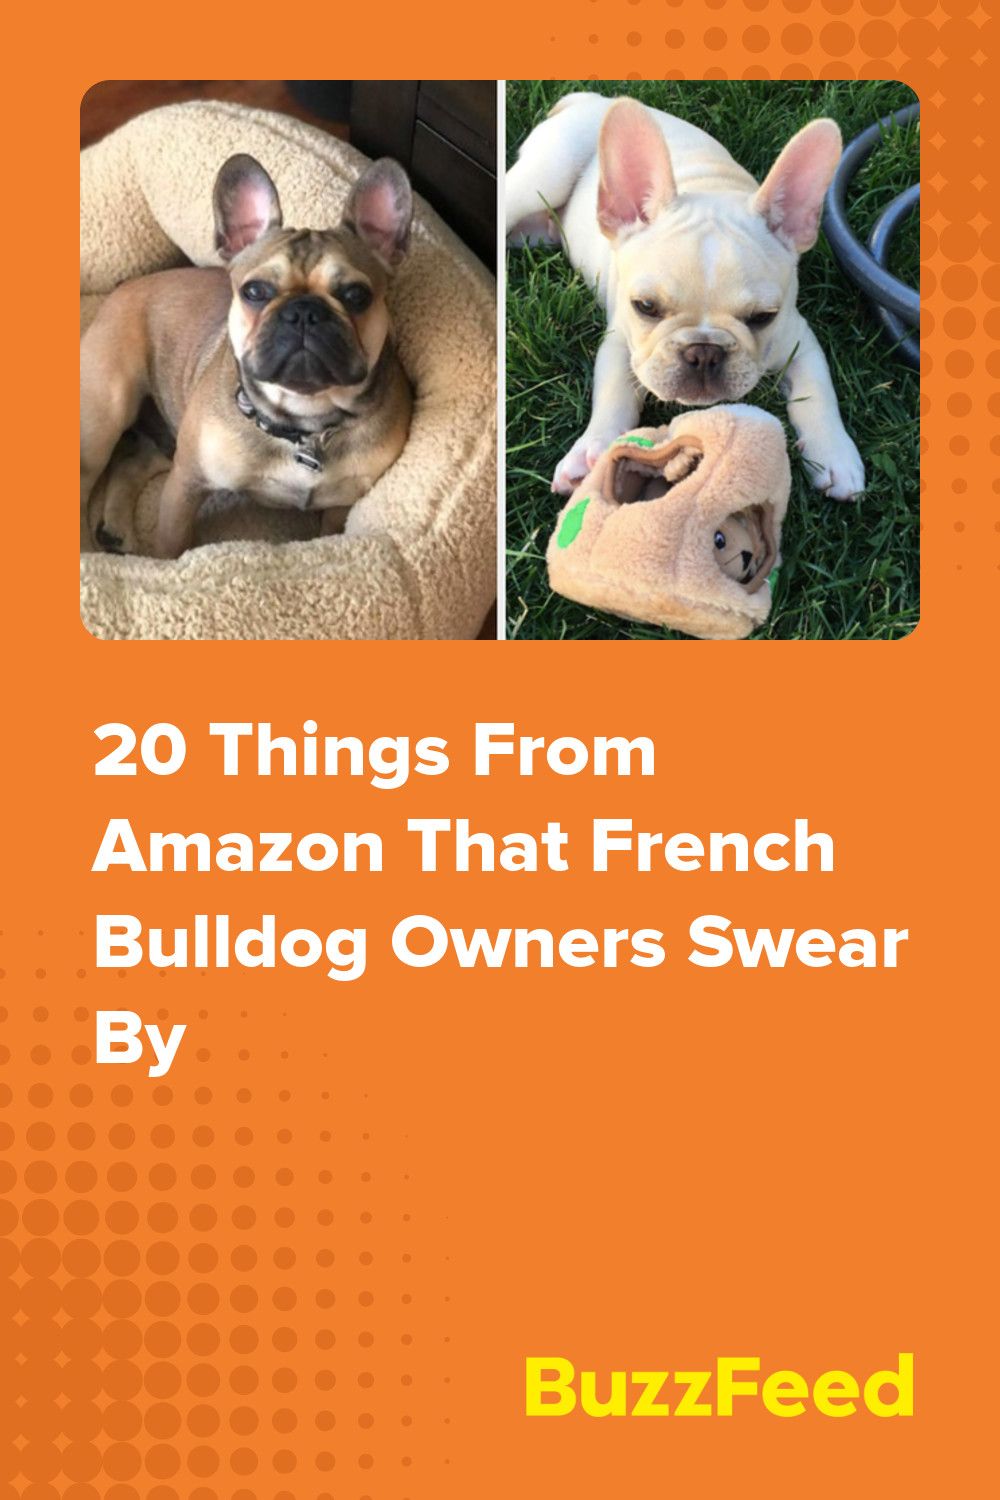 20 Things From Amazon That French Bulldog Owners Swear By